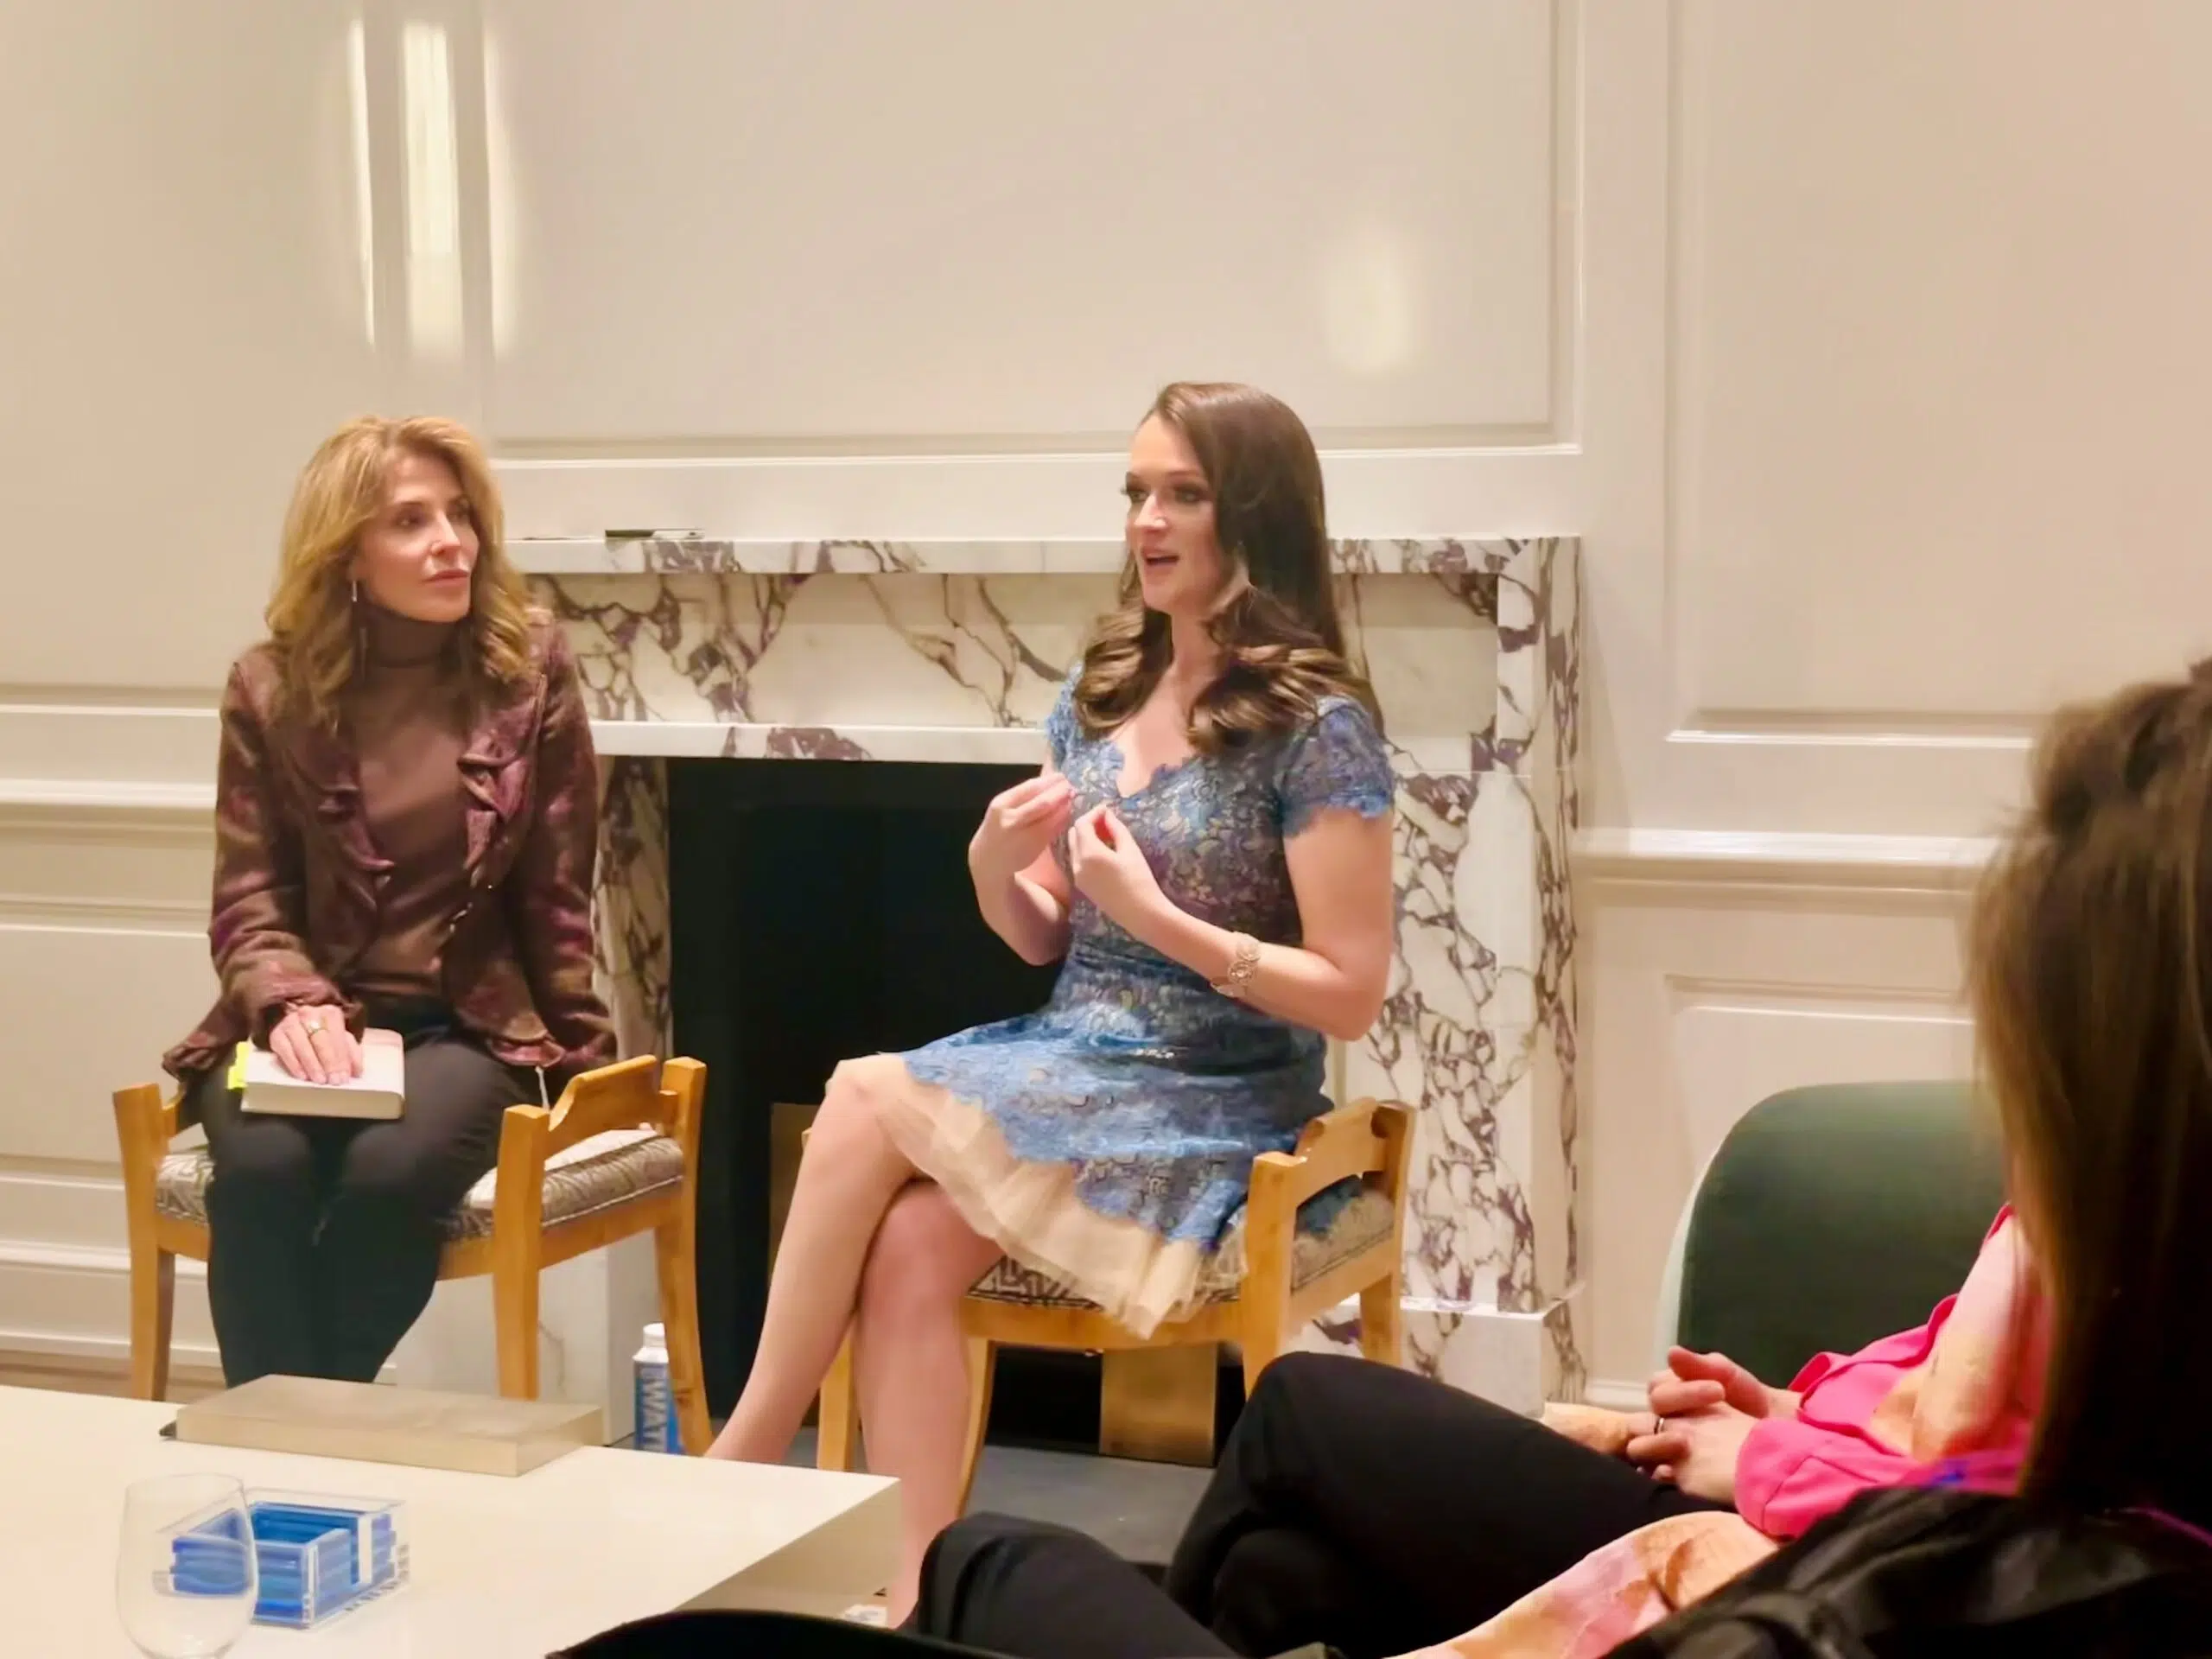 Independent Women’s Network Hosts Chapter Meeting with Author Carrie Sheffield to Discuss New Book, “Motorhome Prophecies: A Journey of Healing and Forgiveness”